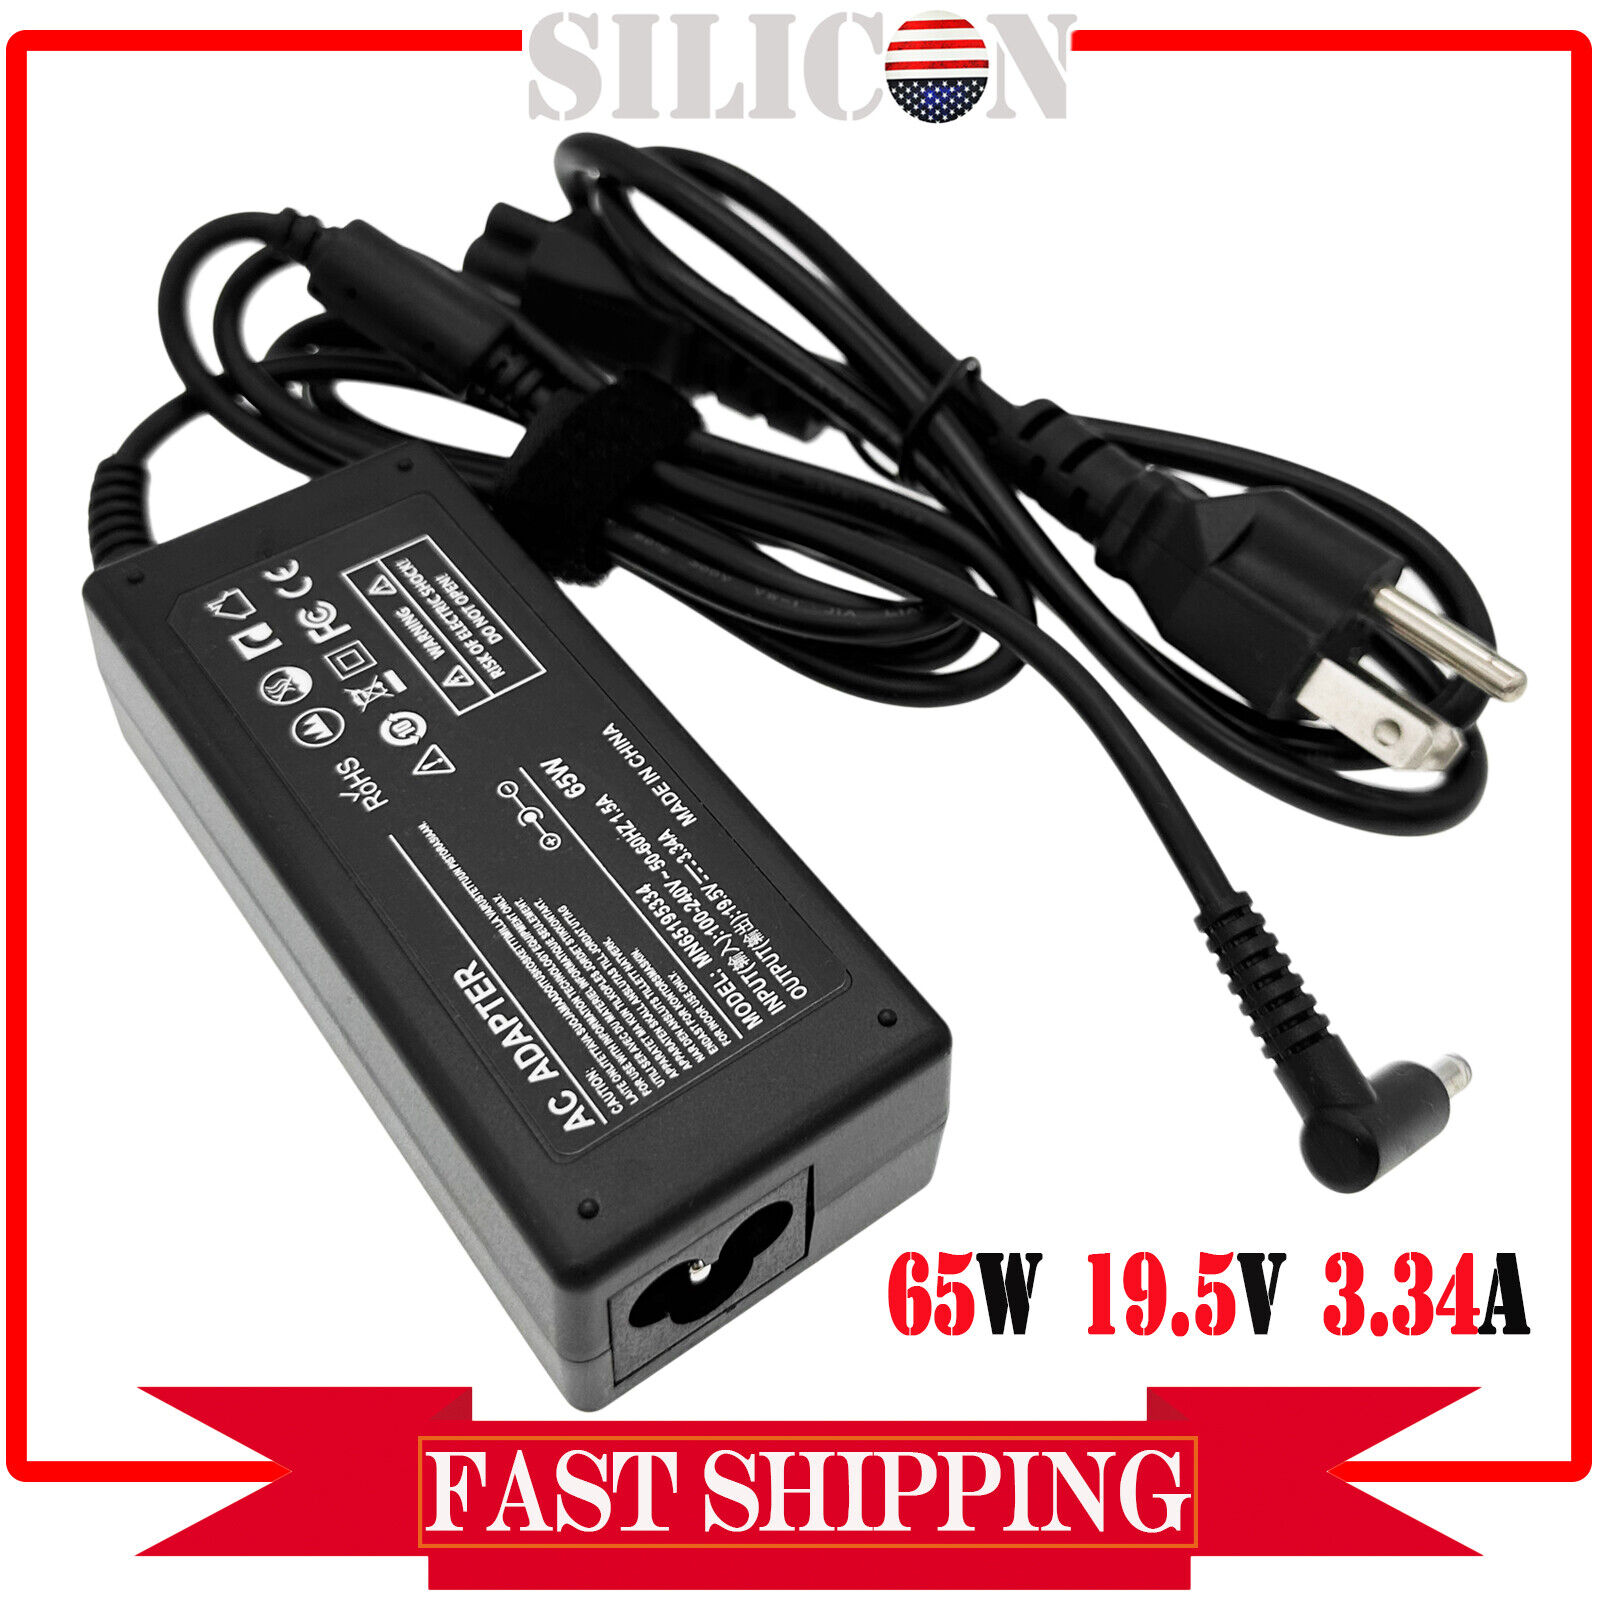 AC Adapter Charger Power Supply For Dell Inspiron 22-3275 22-3277 AIO Computer 